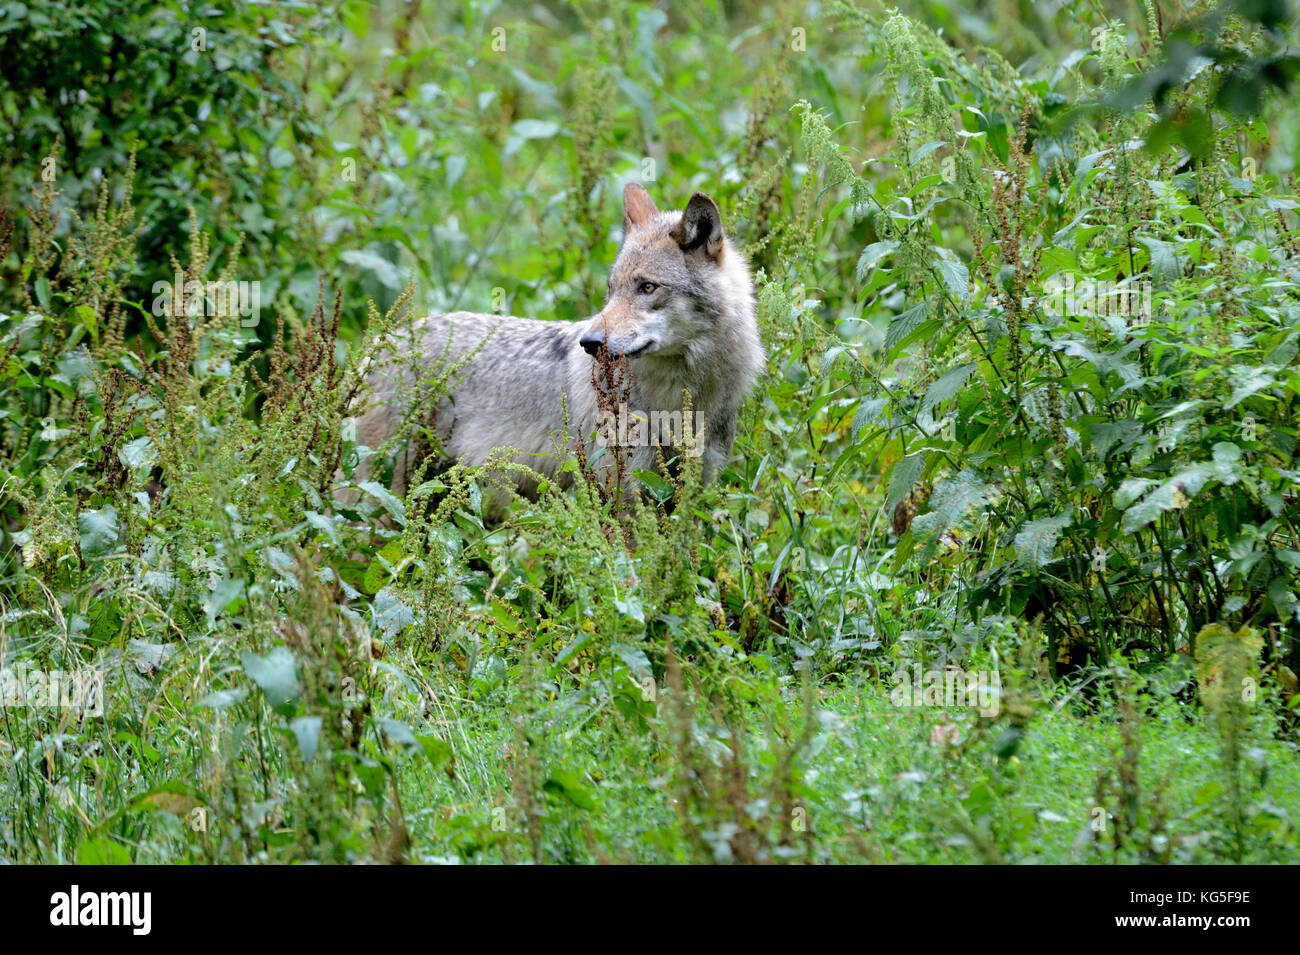 Wolf, Canis lupus, forest, thicket, Stock Photo